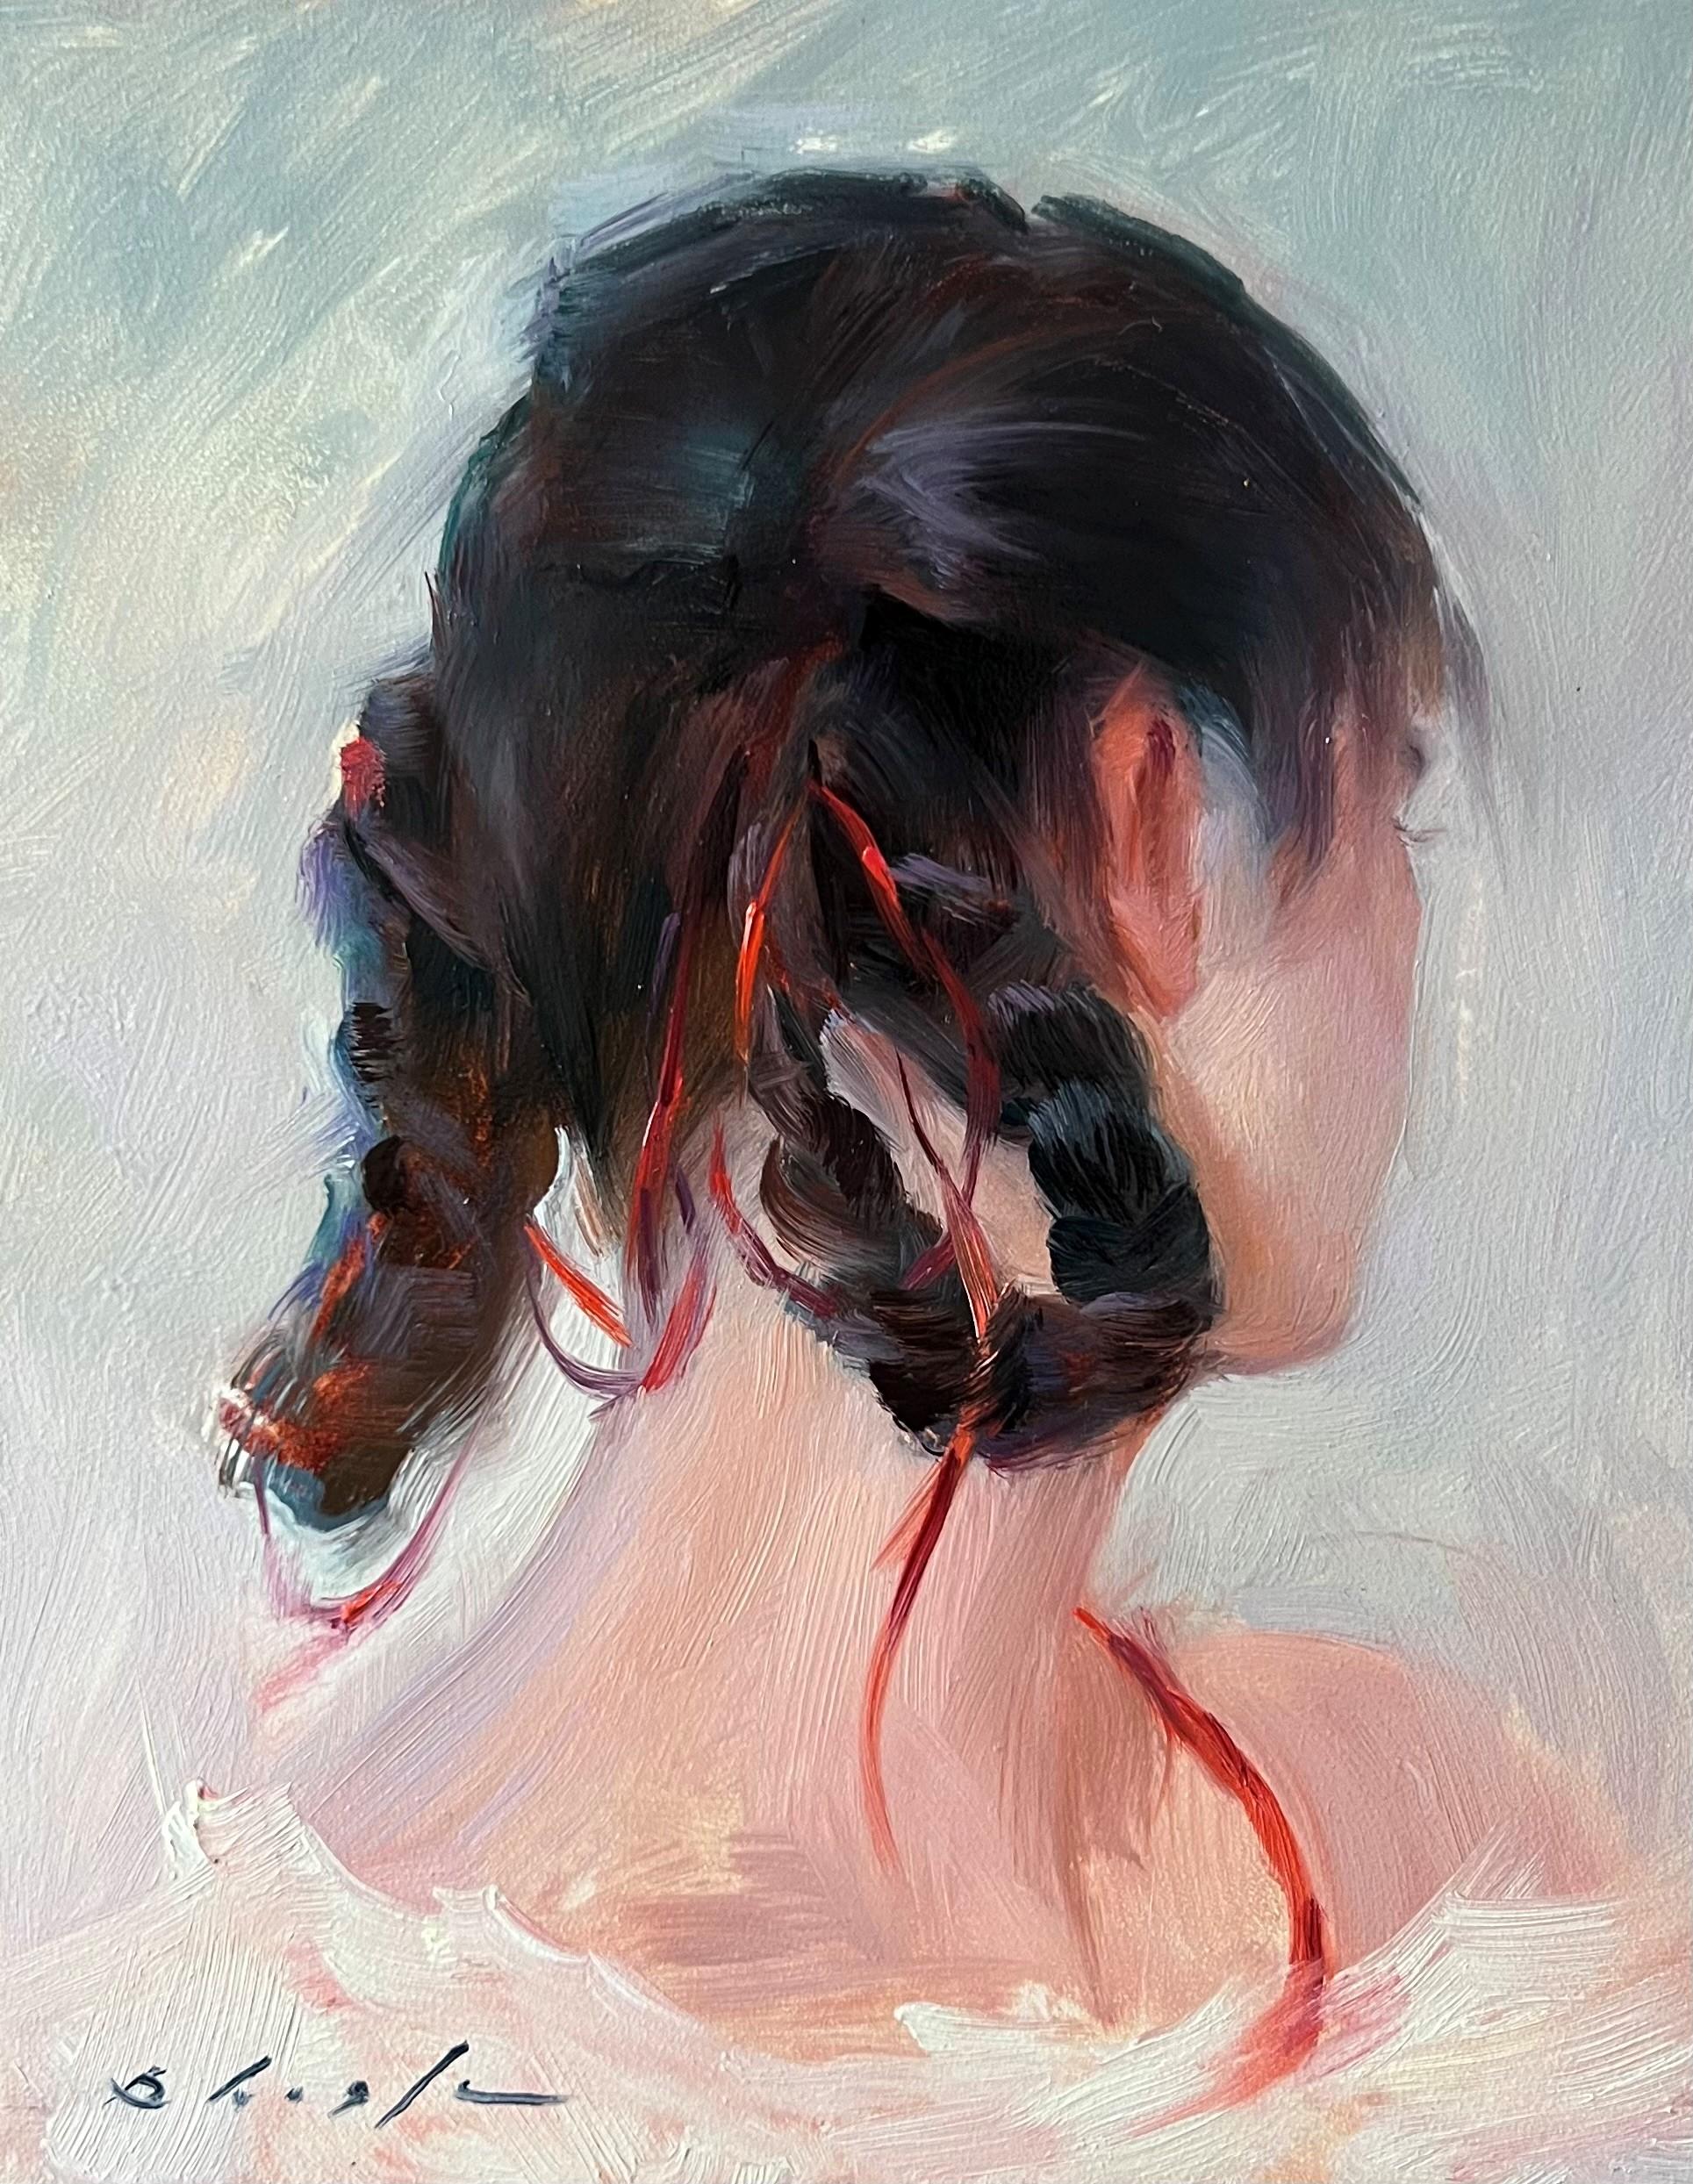 Suchitra Bhosle Portrait Painting - "Dancing Ribbons" Oil Painting